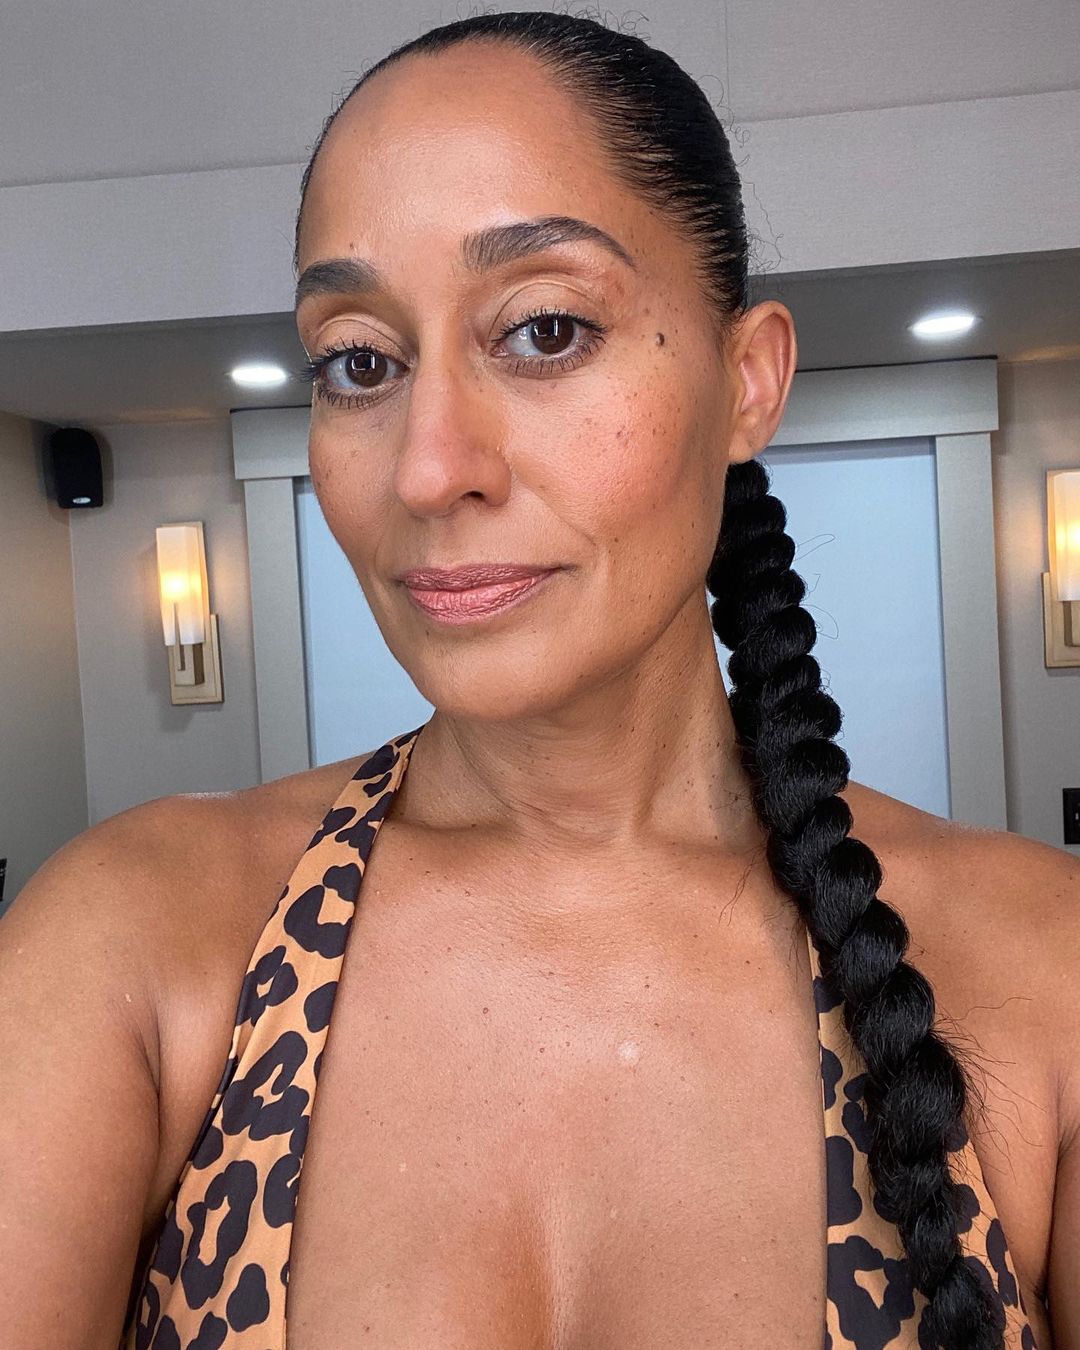 Photos n°2 : Tracee Ellis Ross Thirst Trapping Now and Then!